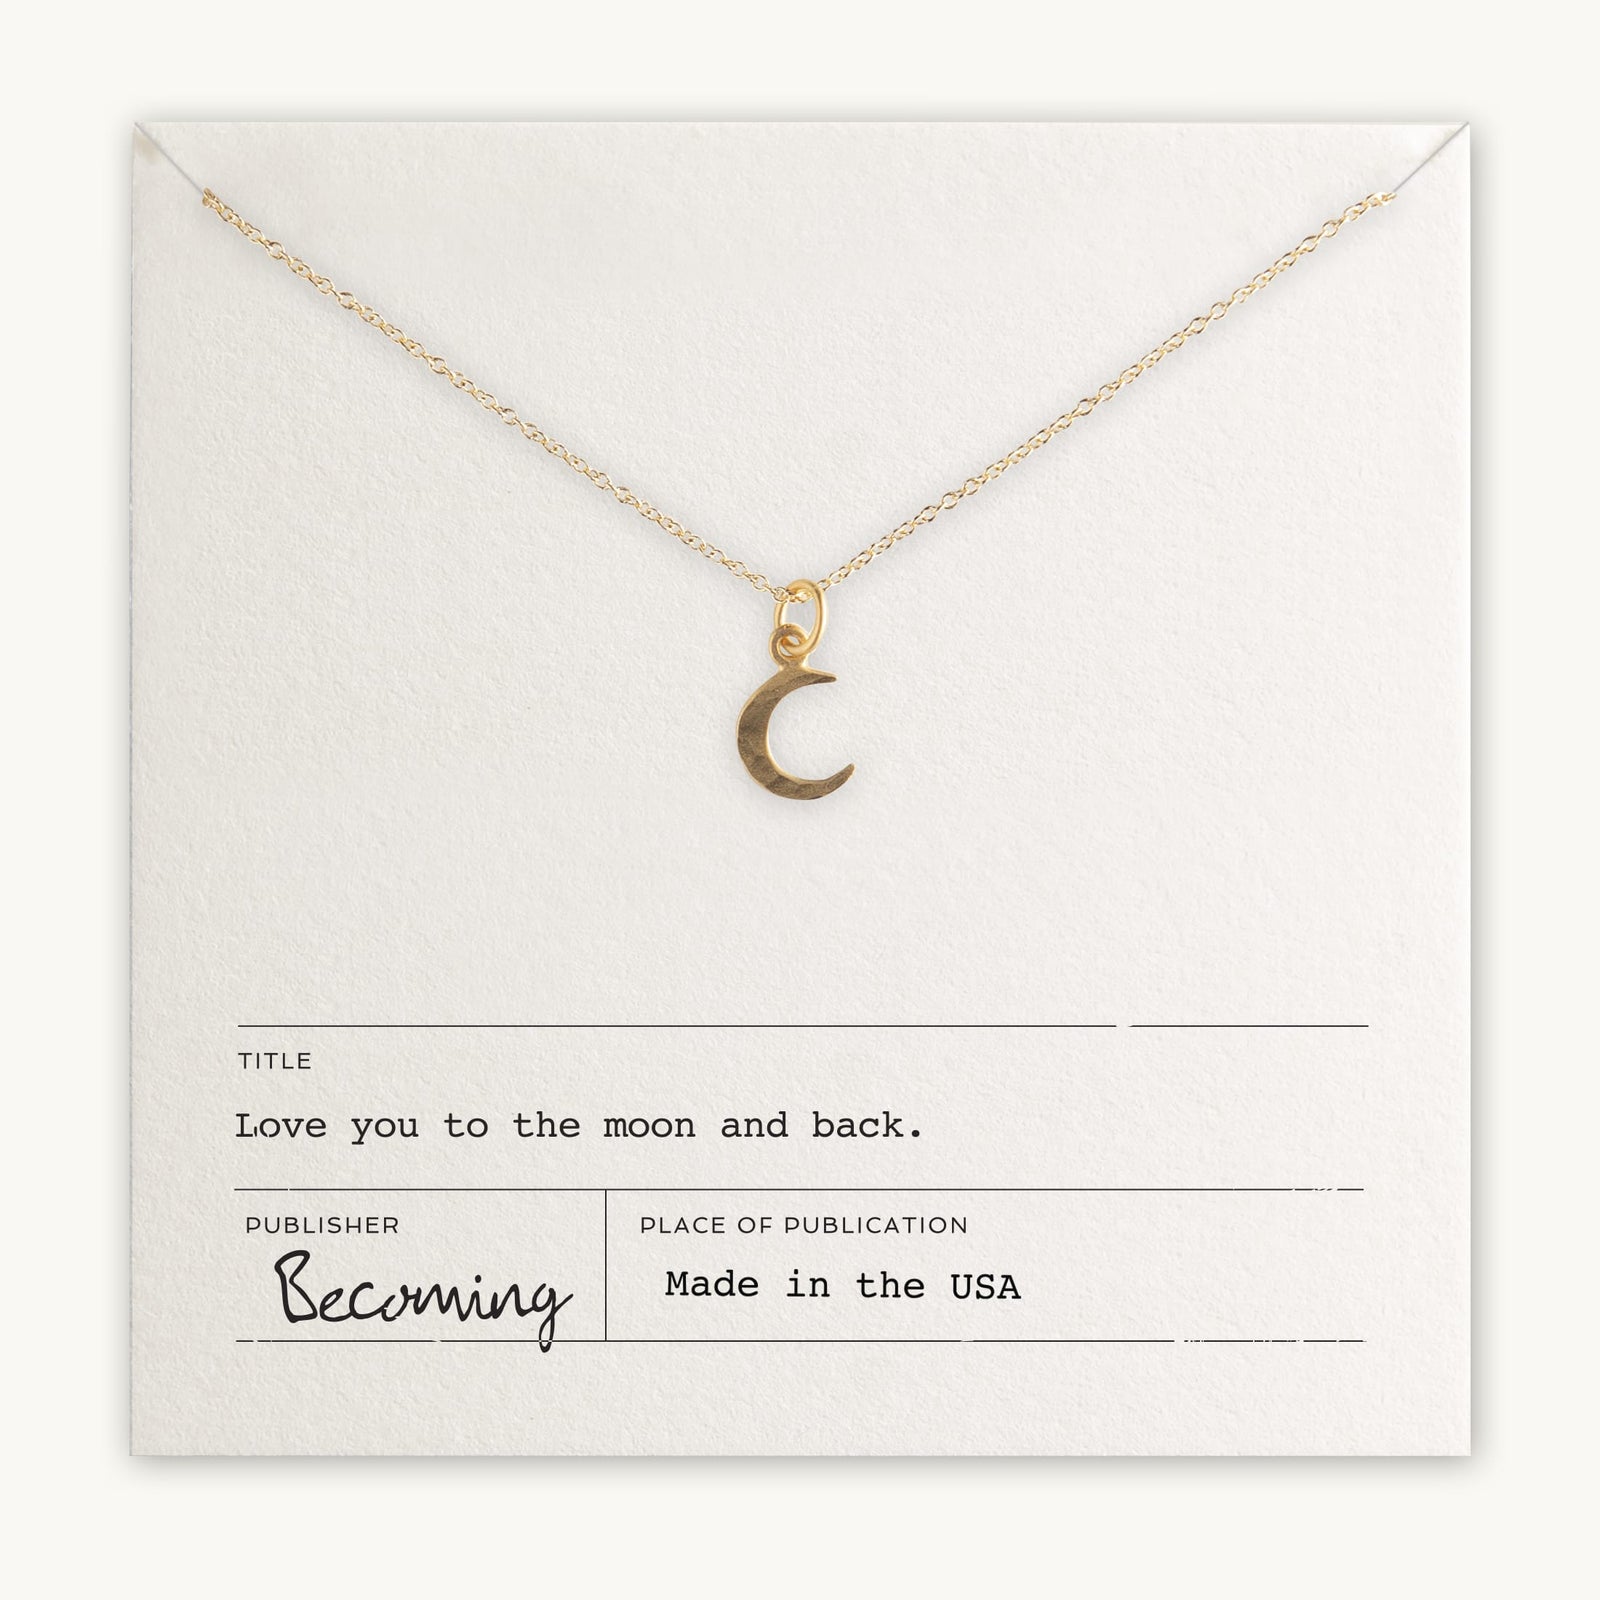 Gold-filled Love You To The Moon Necklace charm pendant on a chain displayed on a card with the inscription 